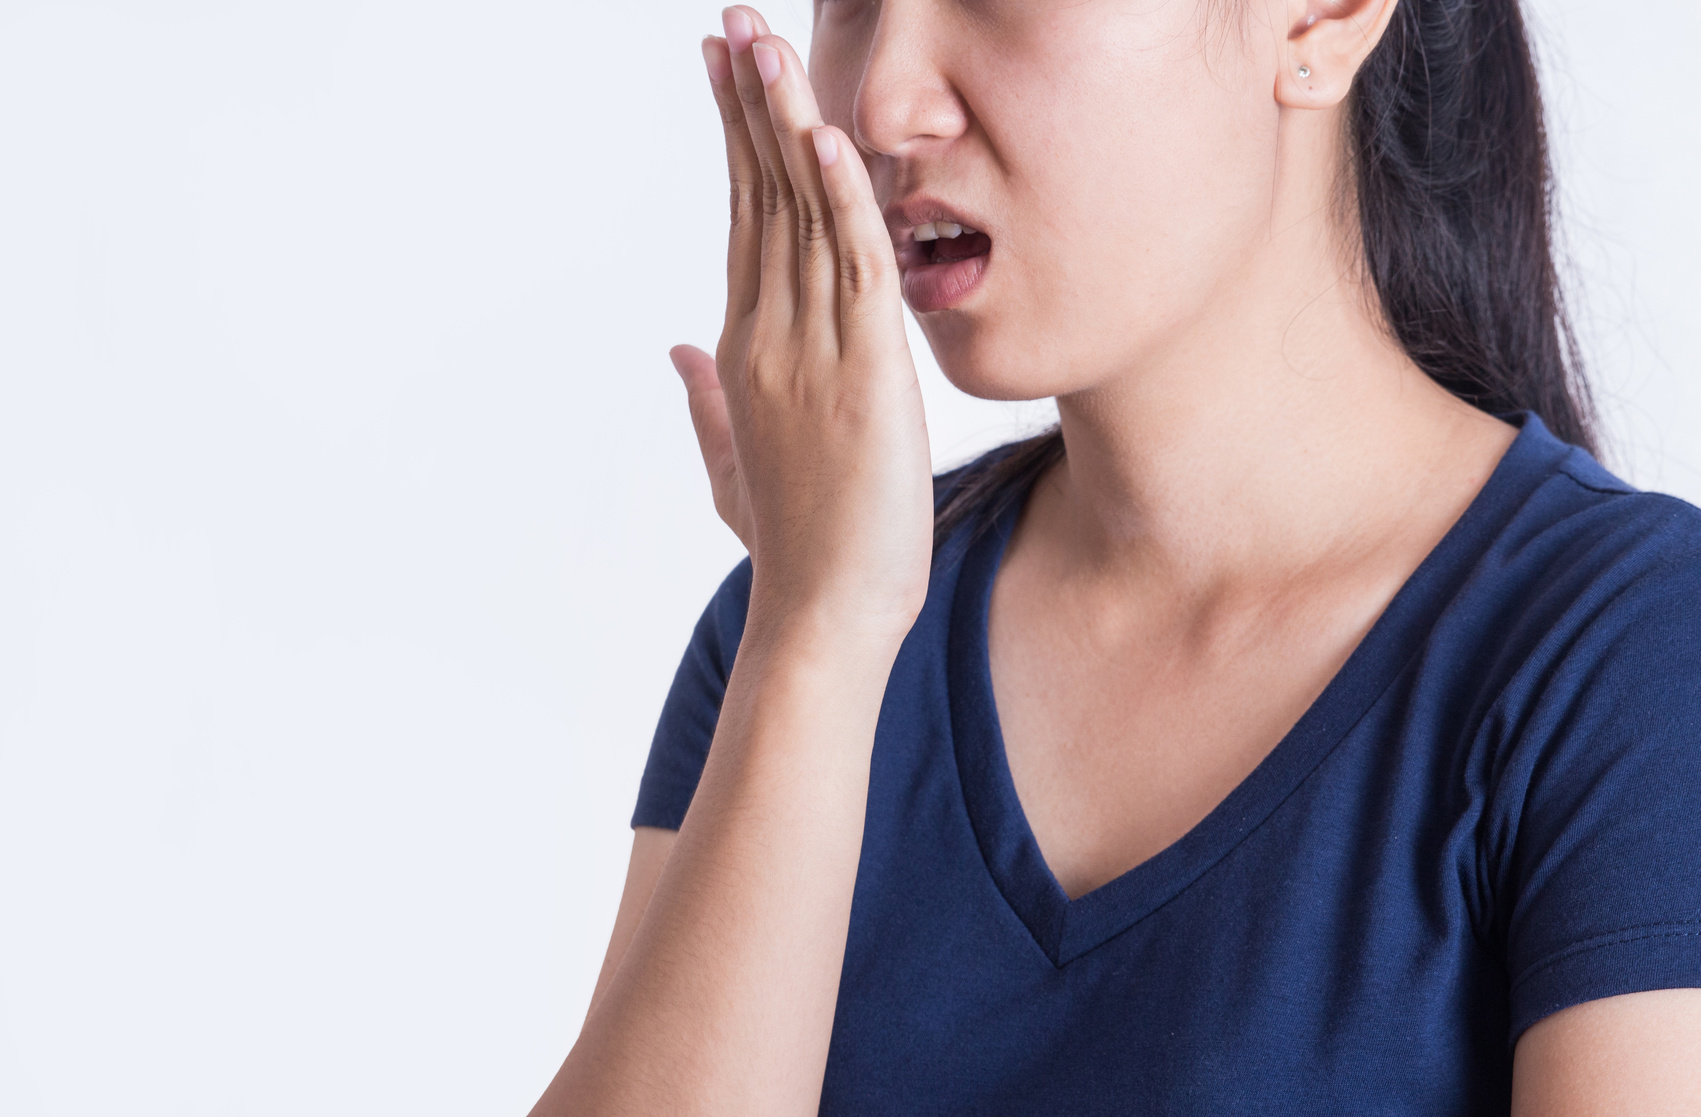 Why do I have bad breath?